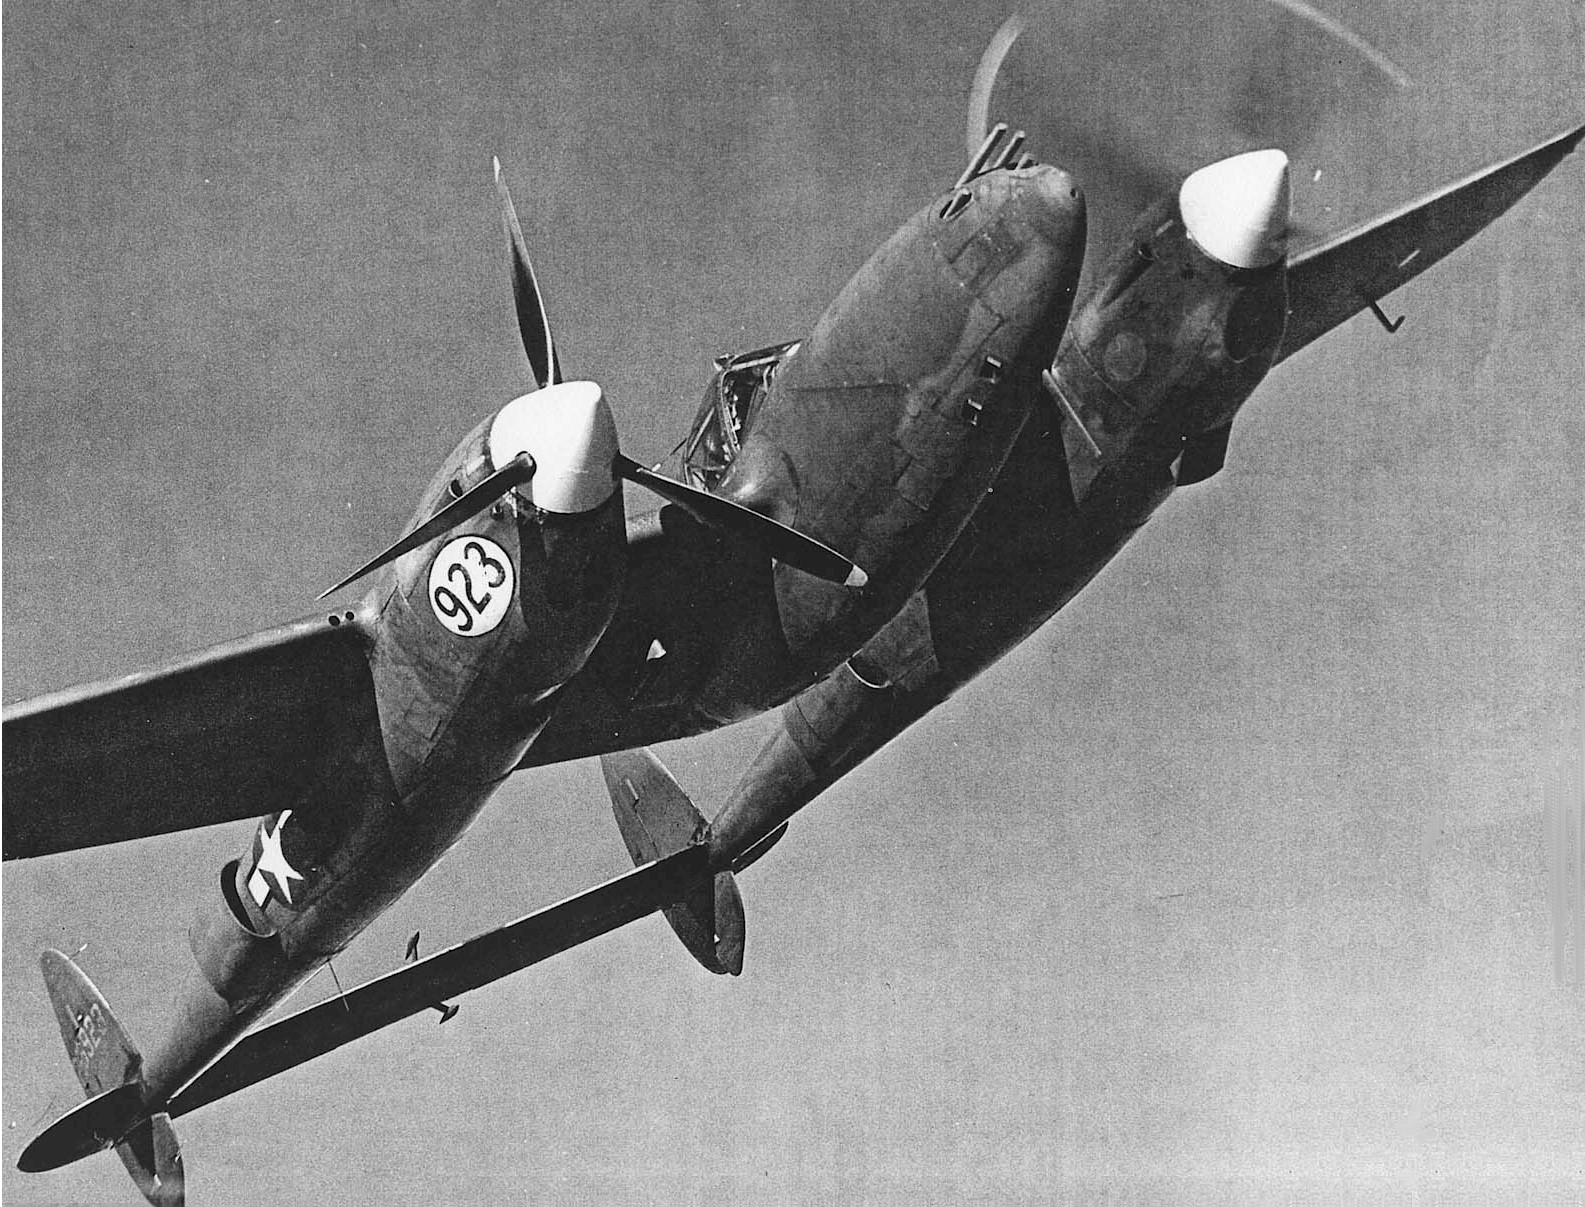 P-38 Lightning aircraft in flight during a demonstration, AAF Tactical Center, Orlando, Florida, United States, 1944-1945, photo 1 of 3; many said this plane would be un-flyable with one engine lost